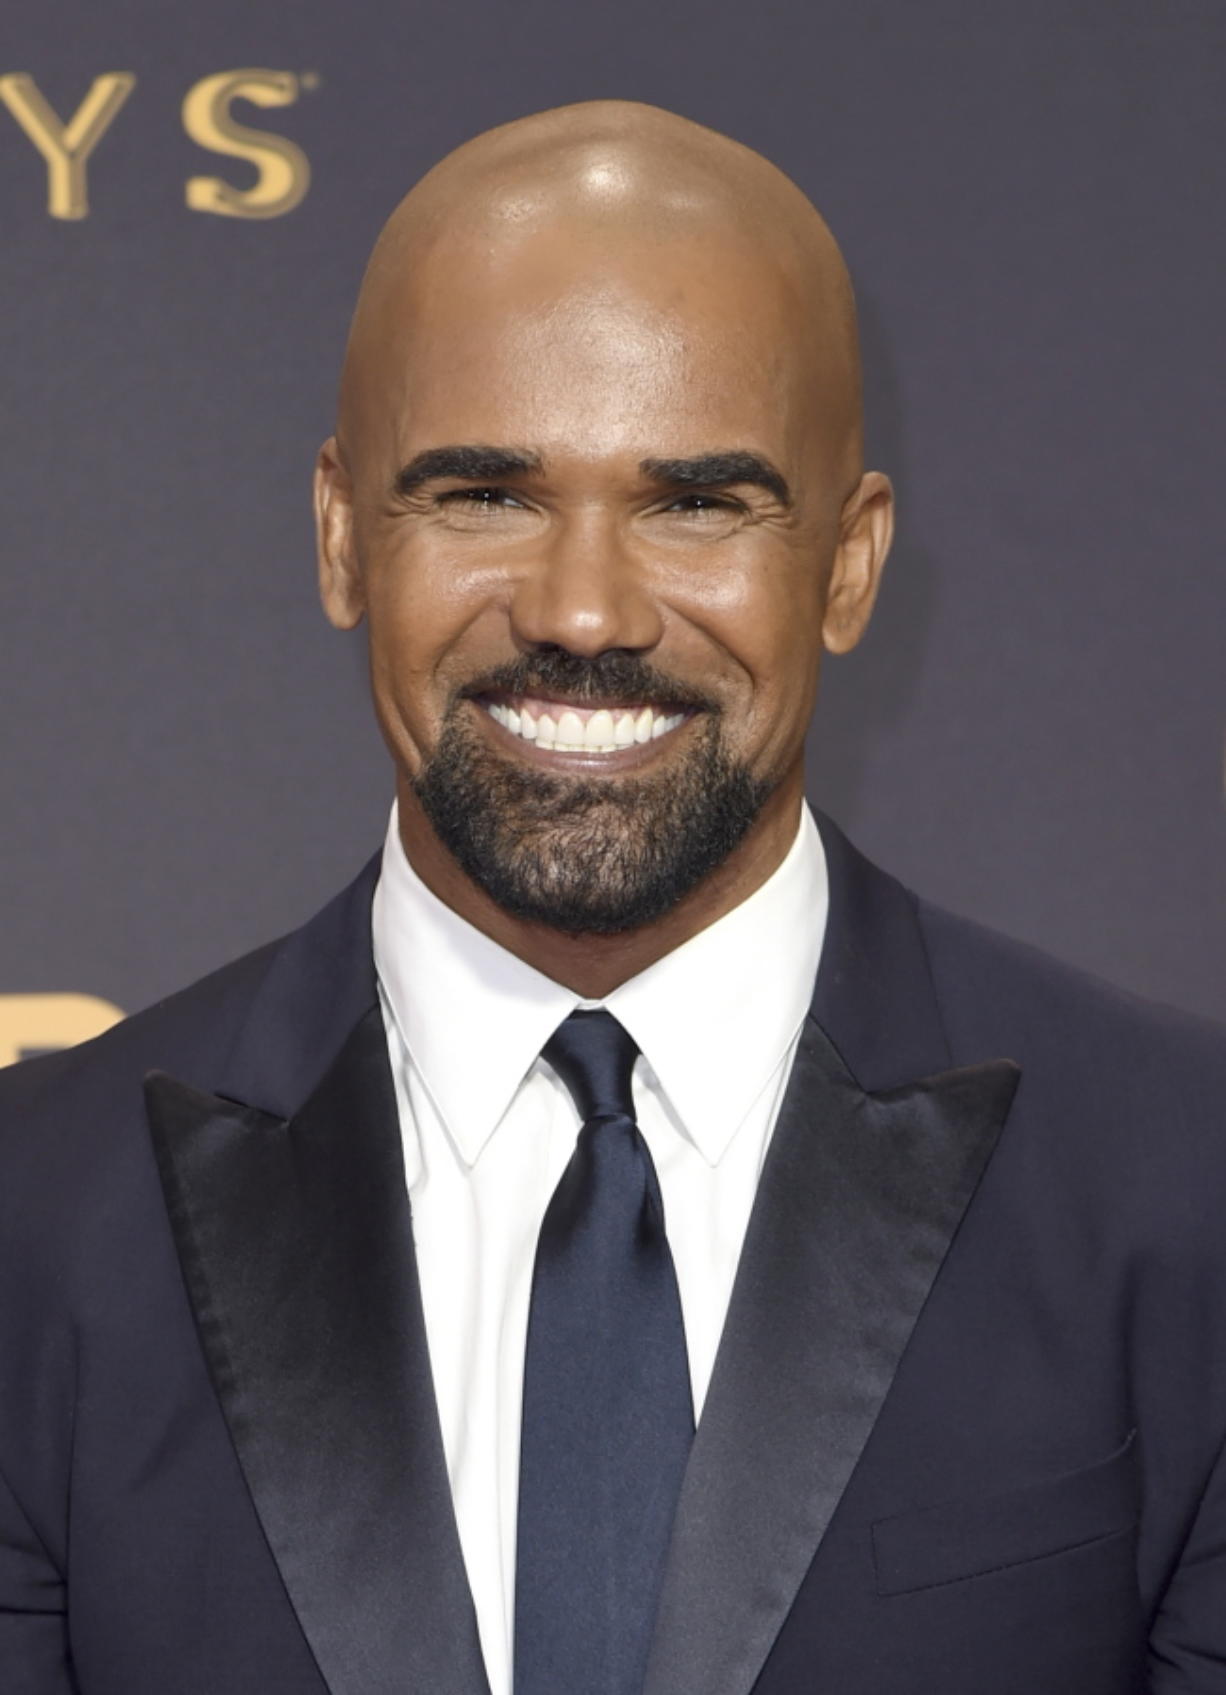 Is Shemar Moore married? Find out in this article